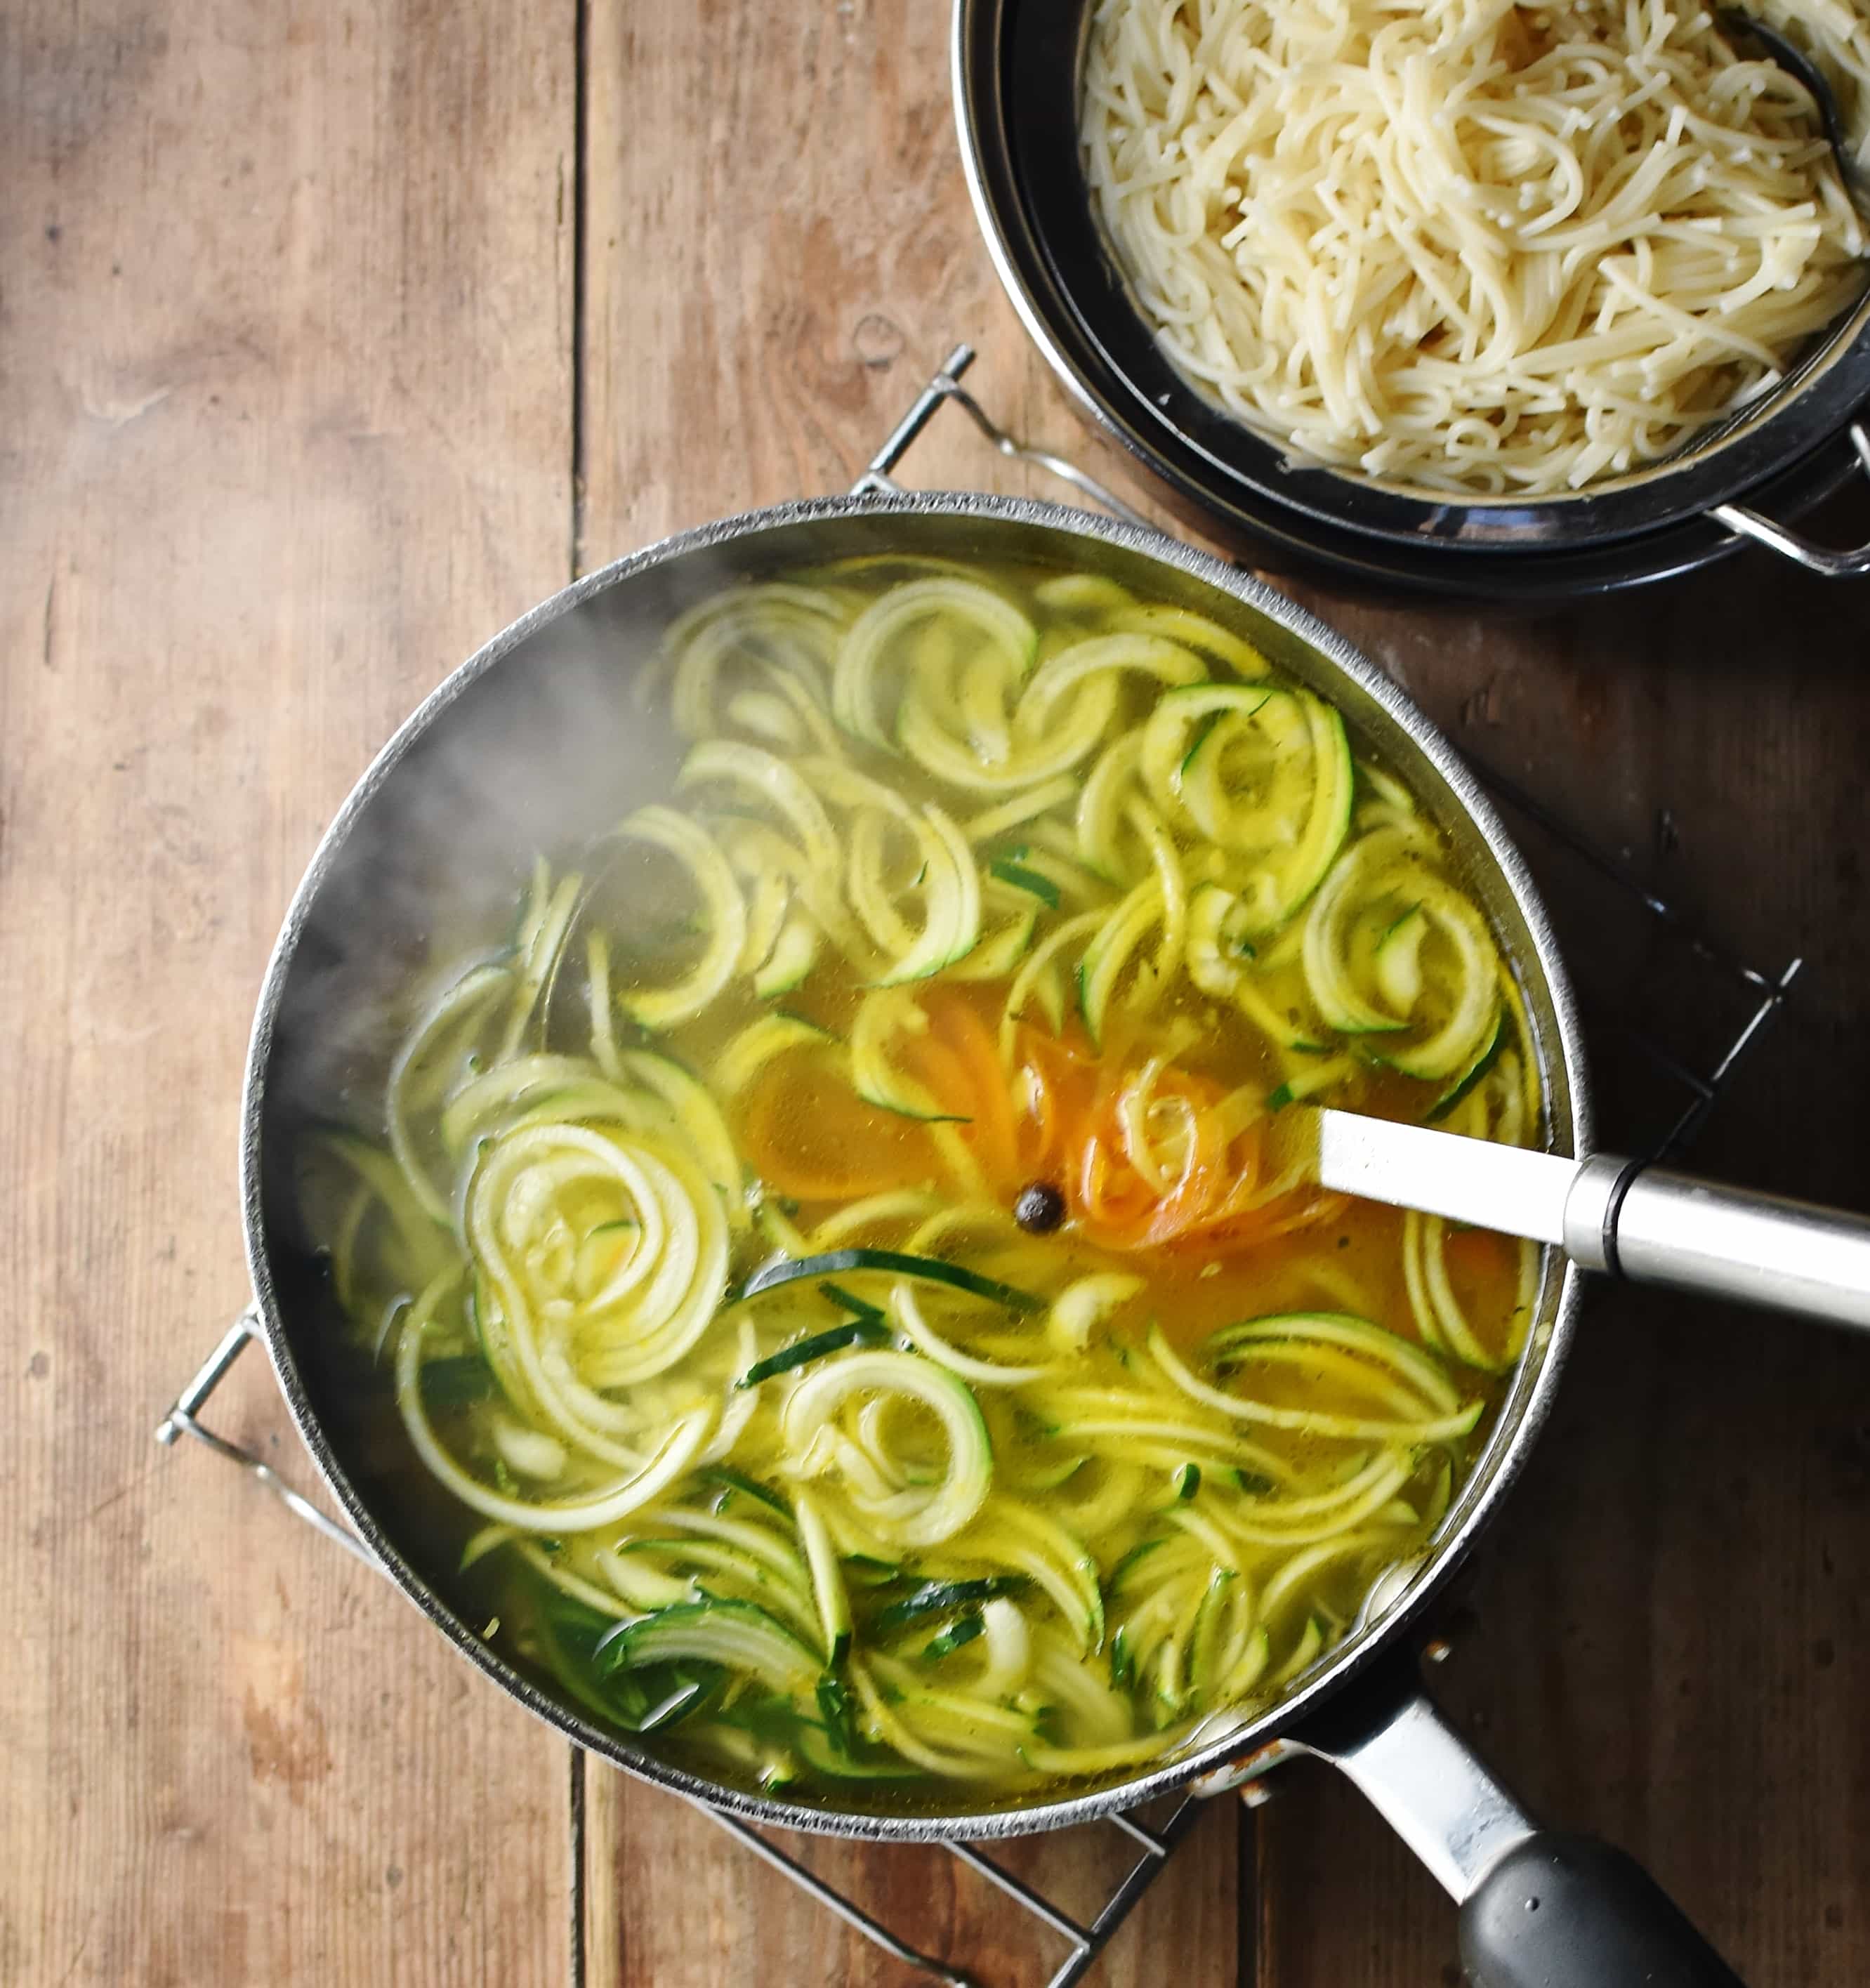 Zucchini noodles in hot soup with steam in large pot with ladle and cooked vermicelli pasta in top right corner.